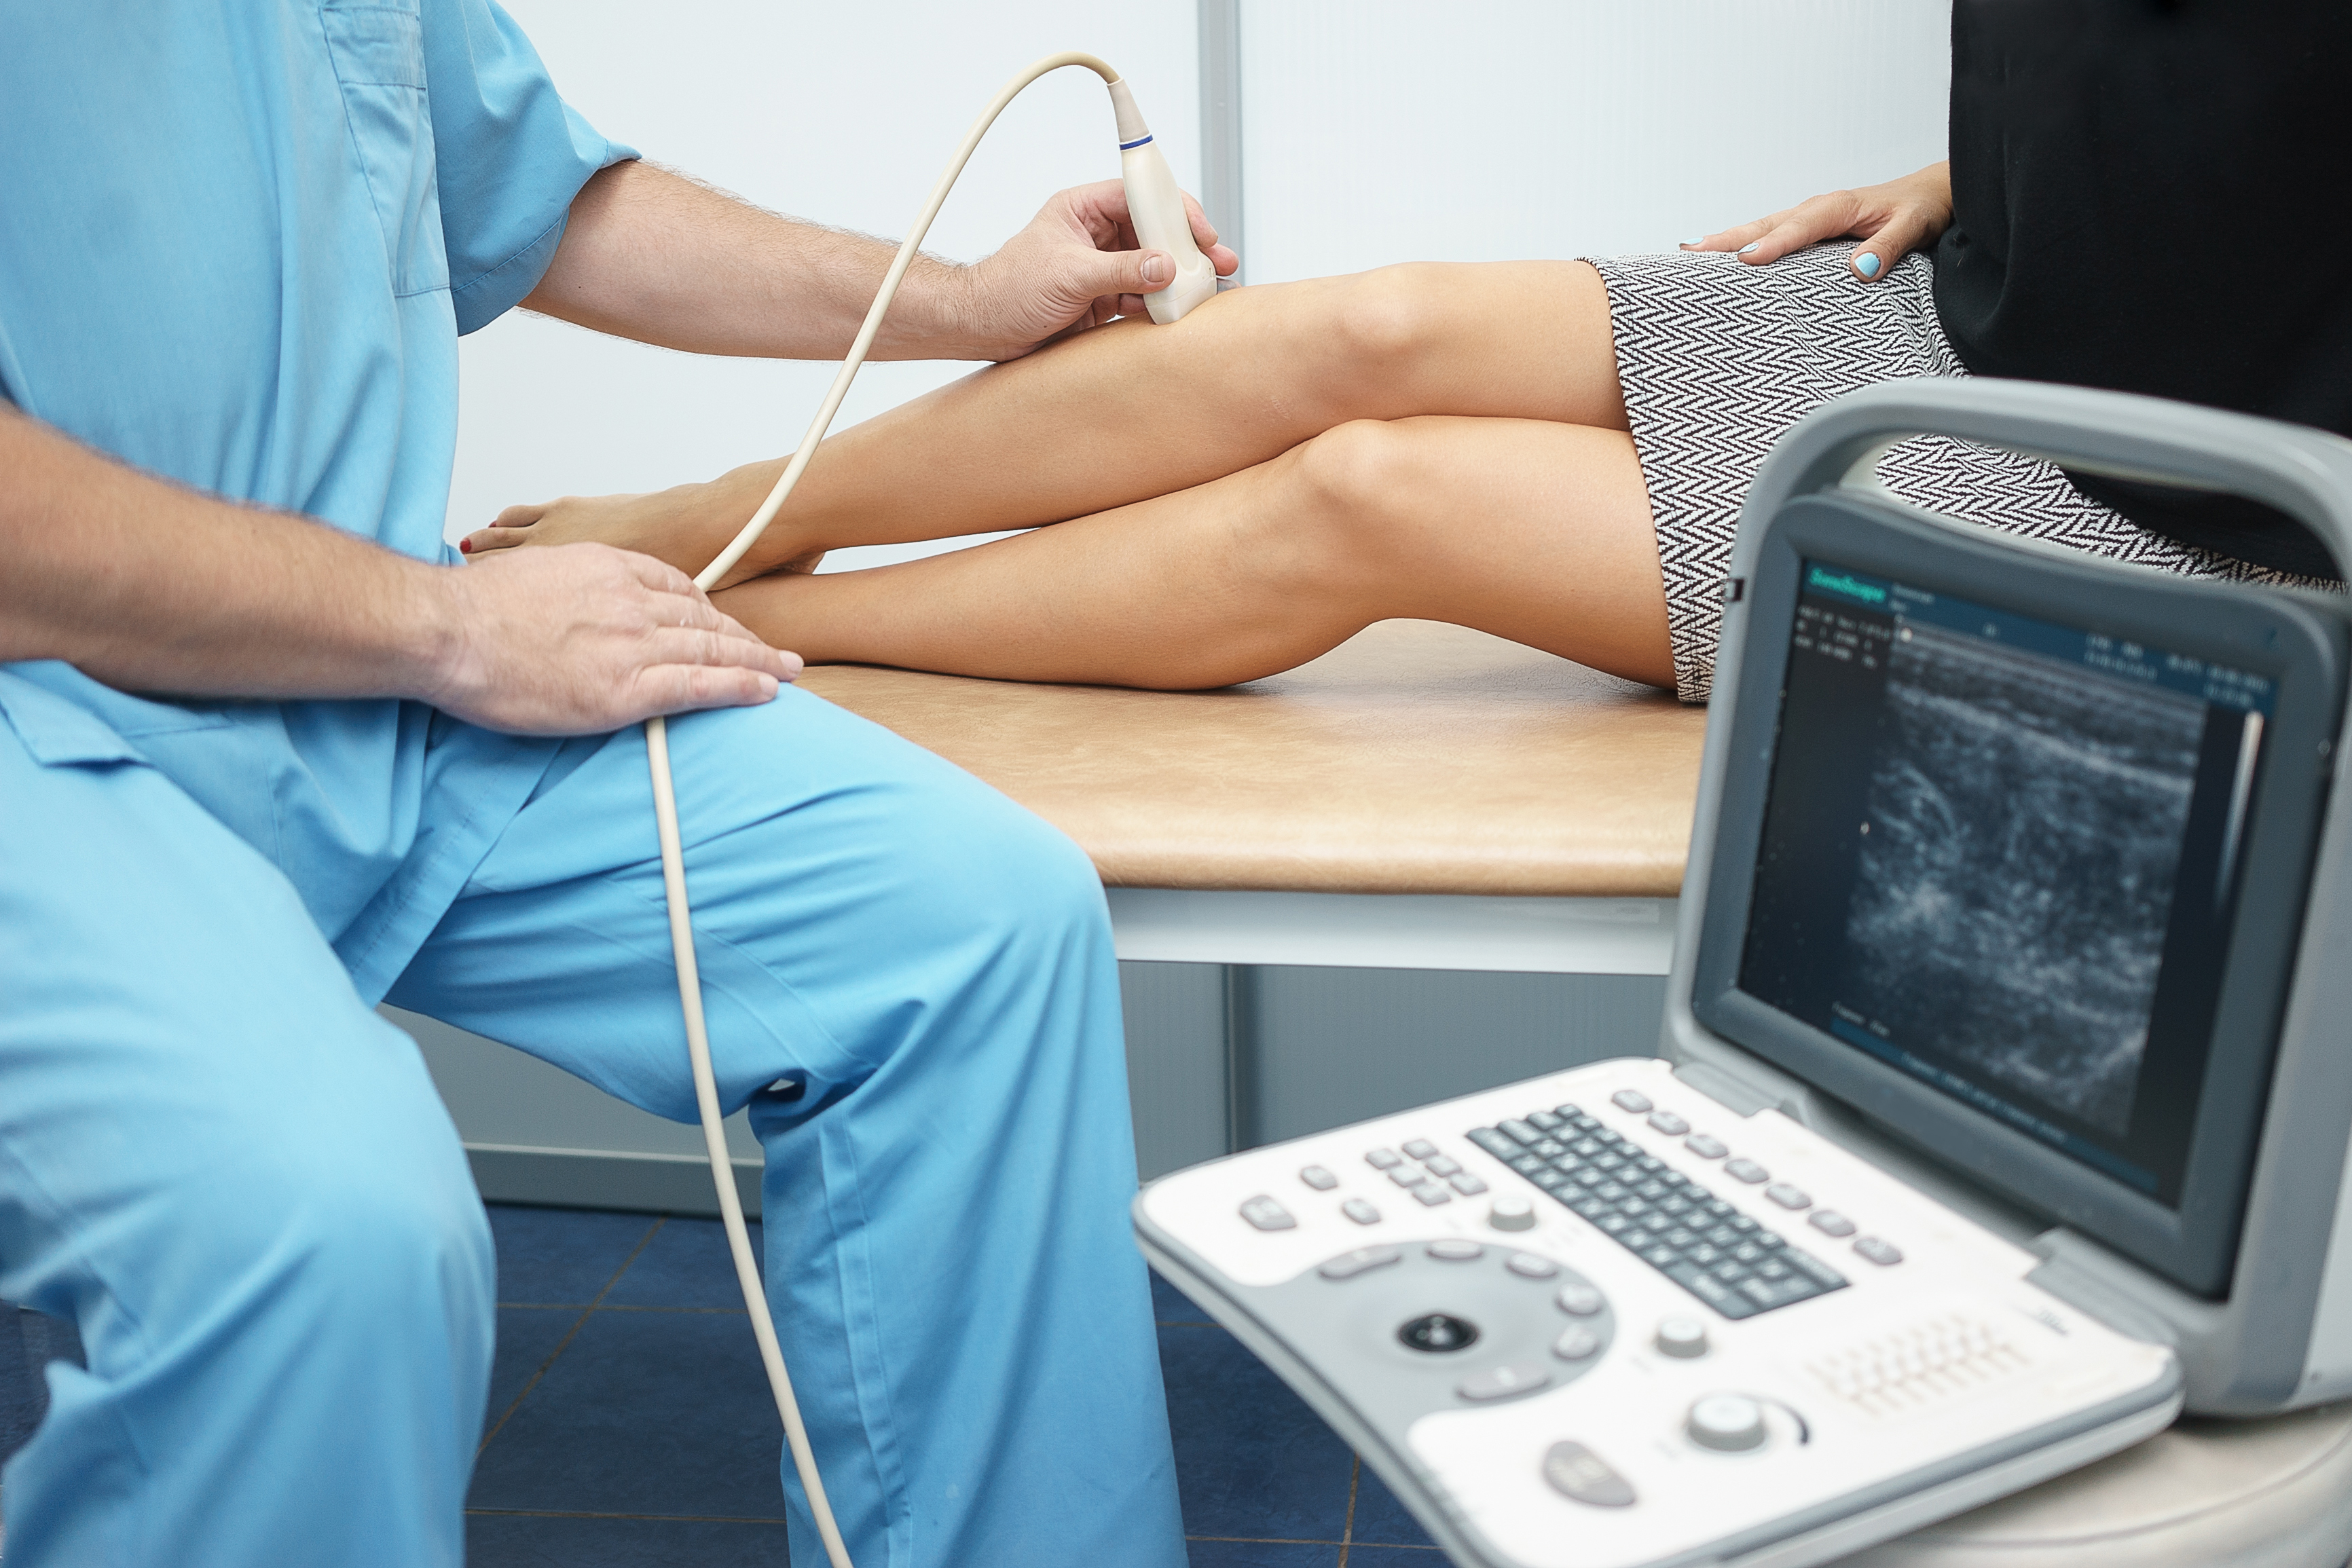 A doctor wearing a blue scrub performing an ultrasound on a woman